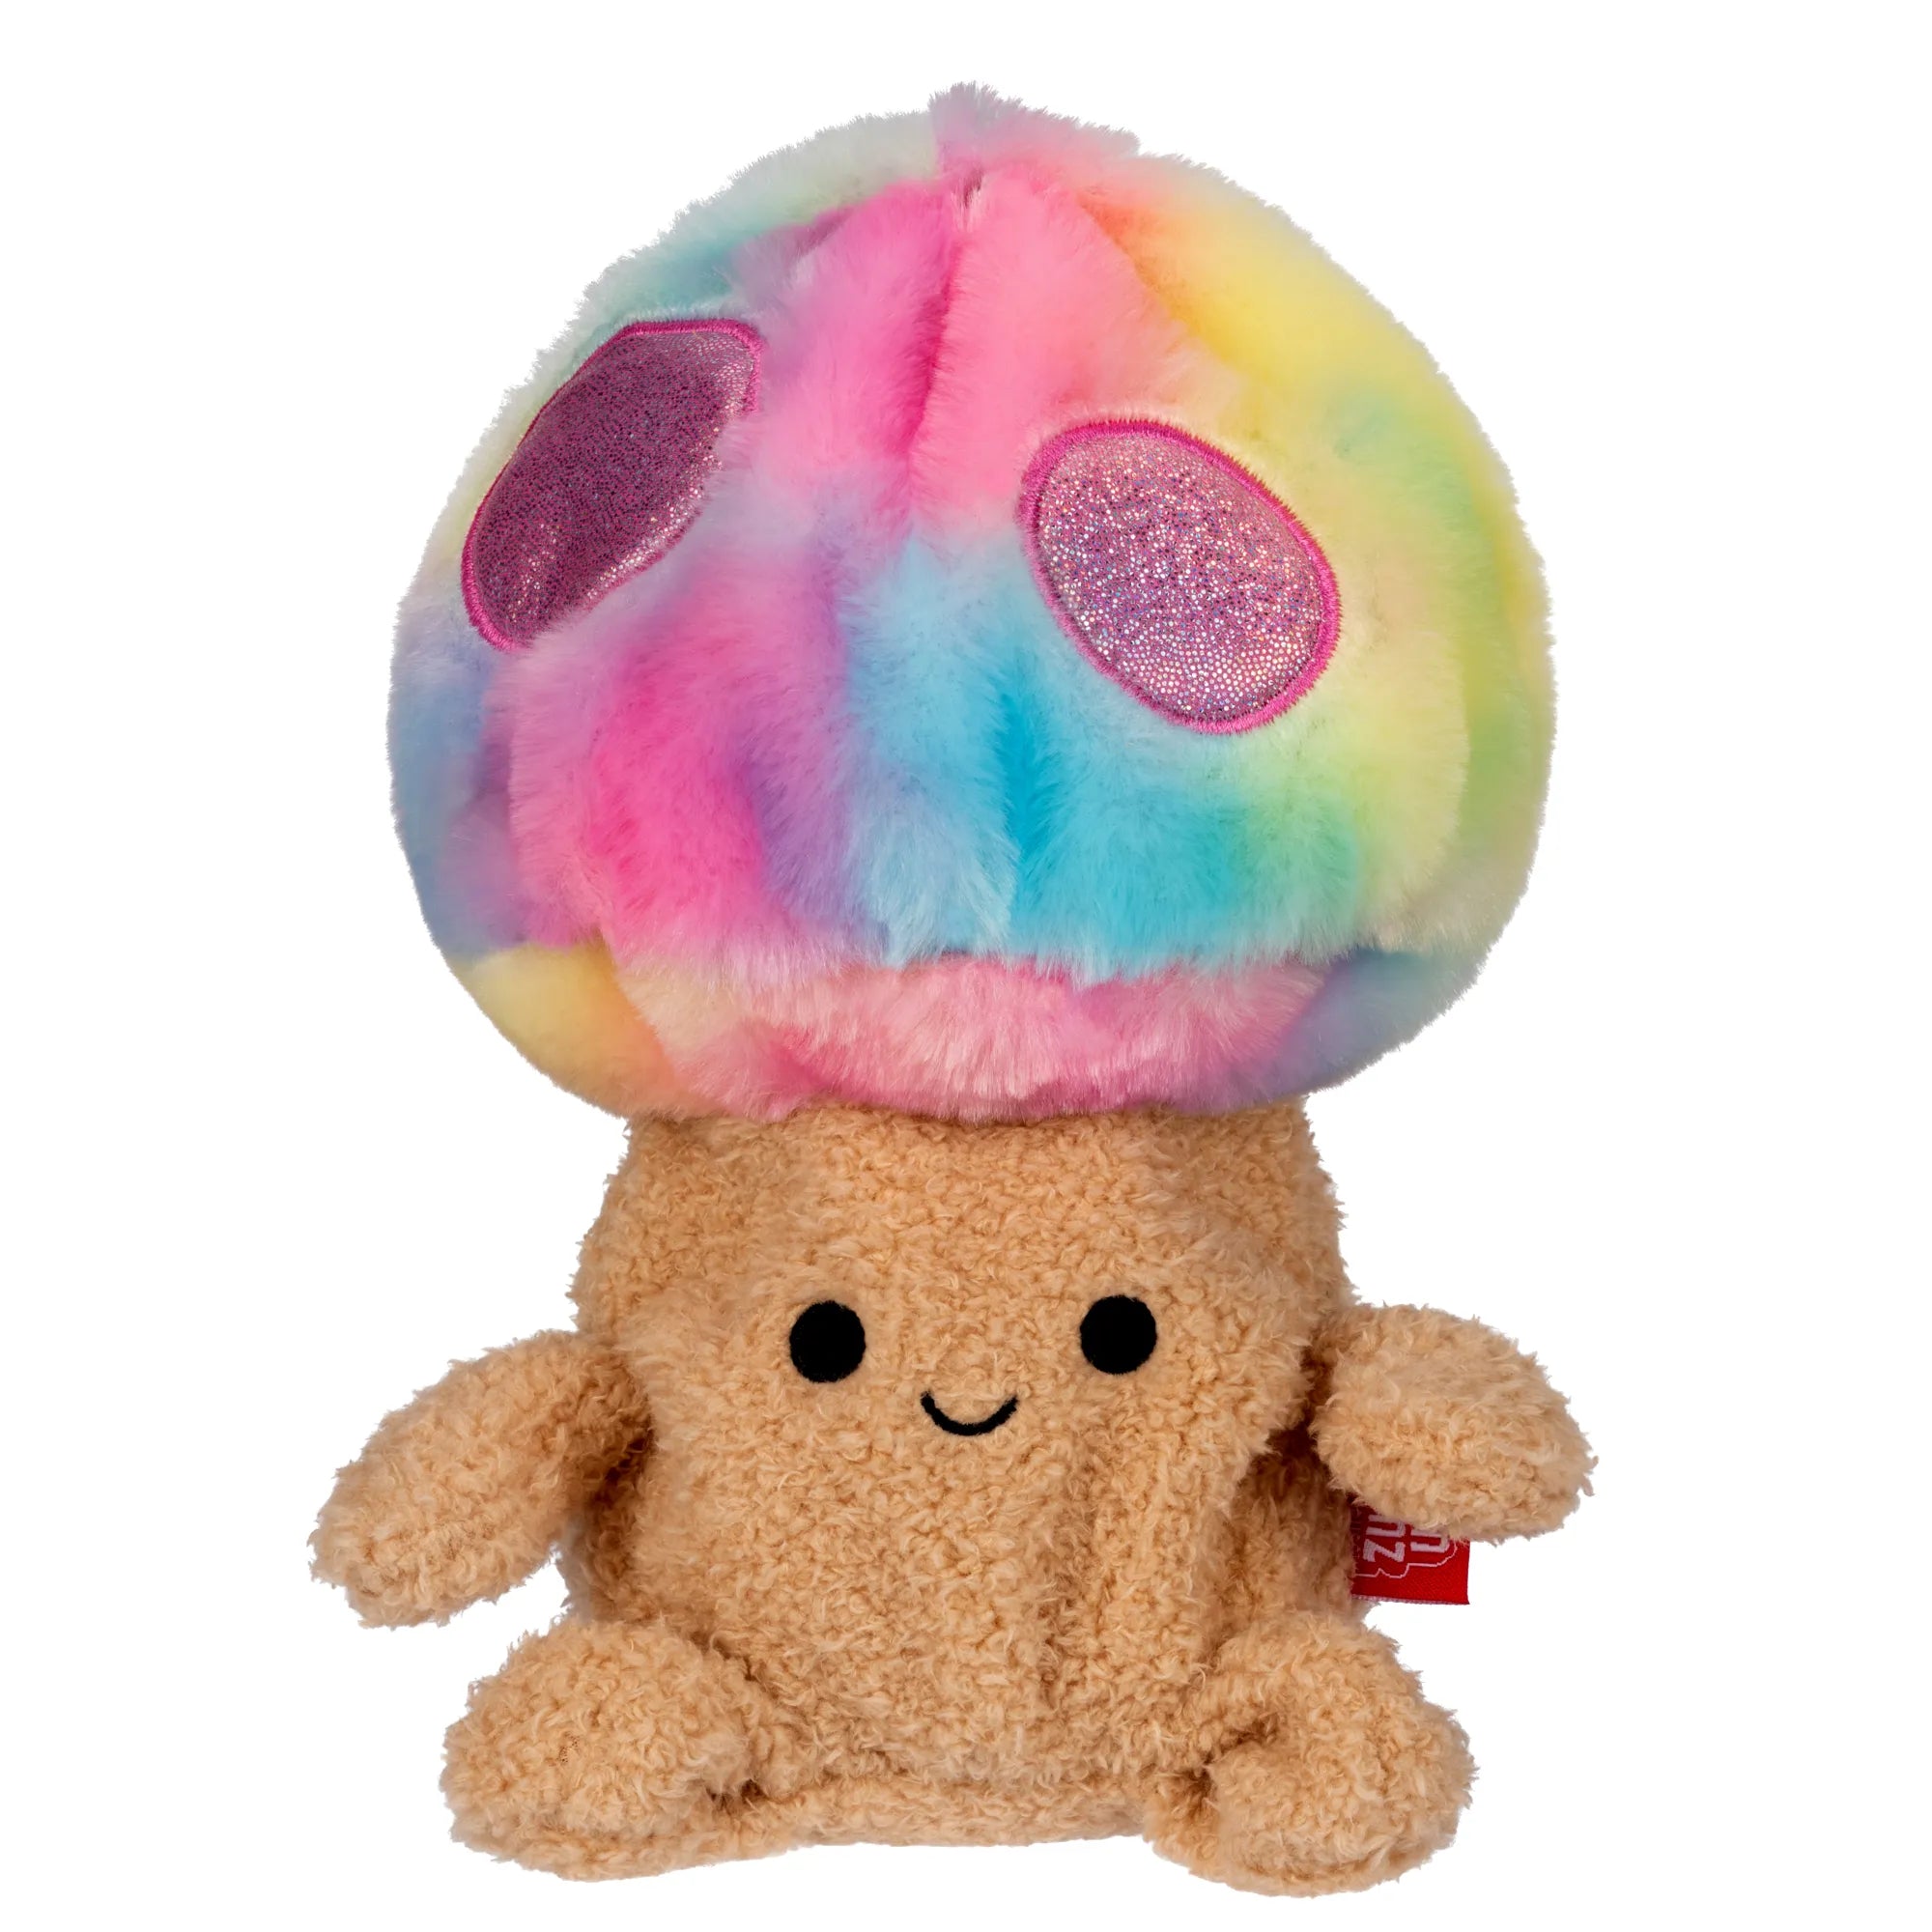 BumBumz 7.5” Garden Series - Collectibles - Rainbow Mushroom 'Mateo' - Ages 3-Adult - Brown's Hobby & Game